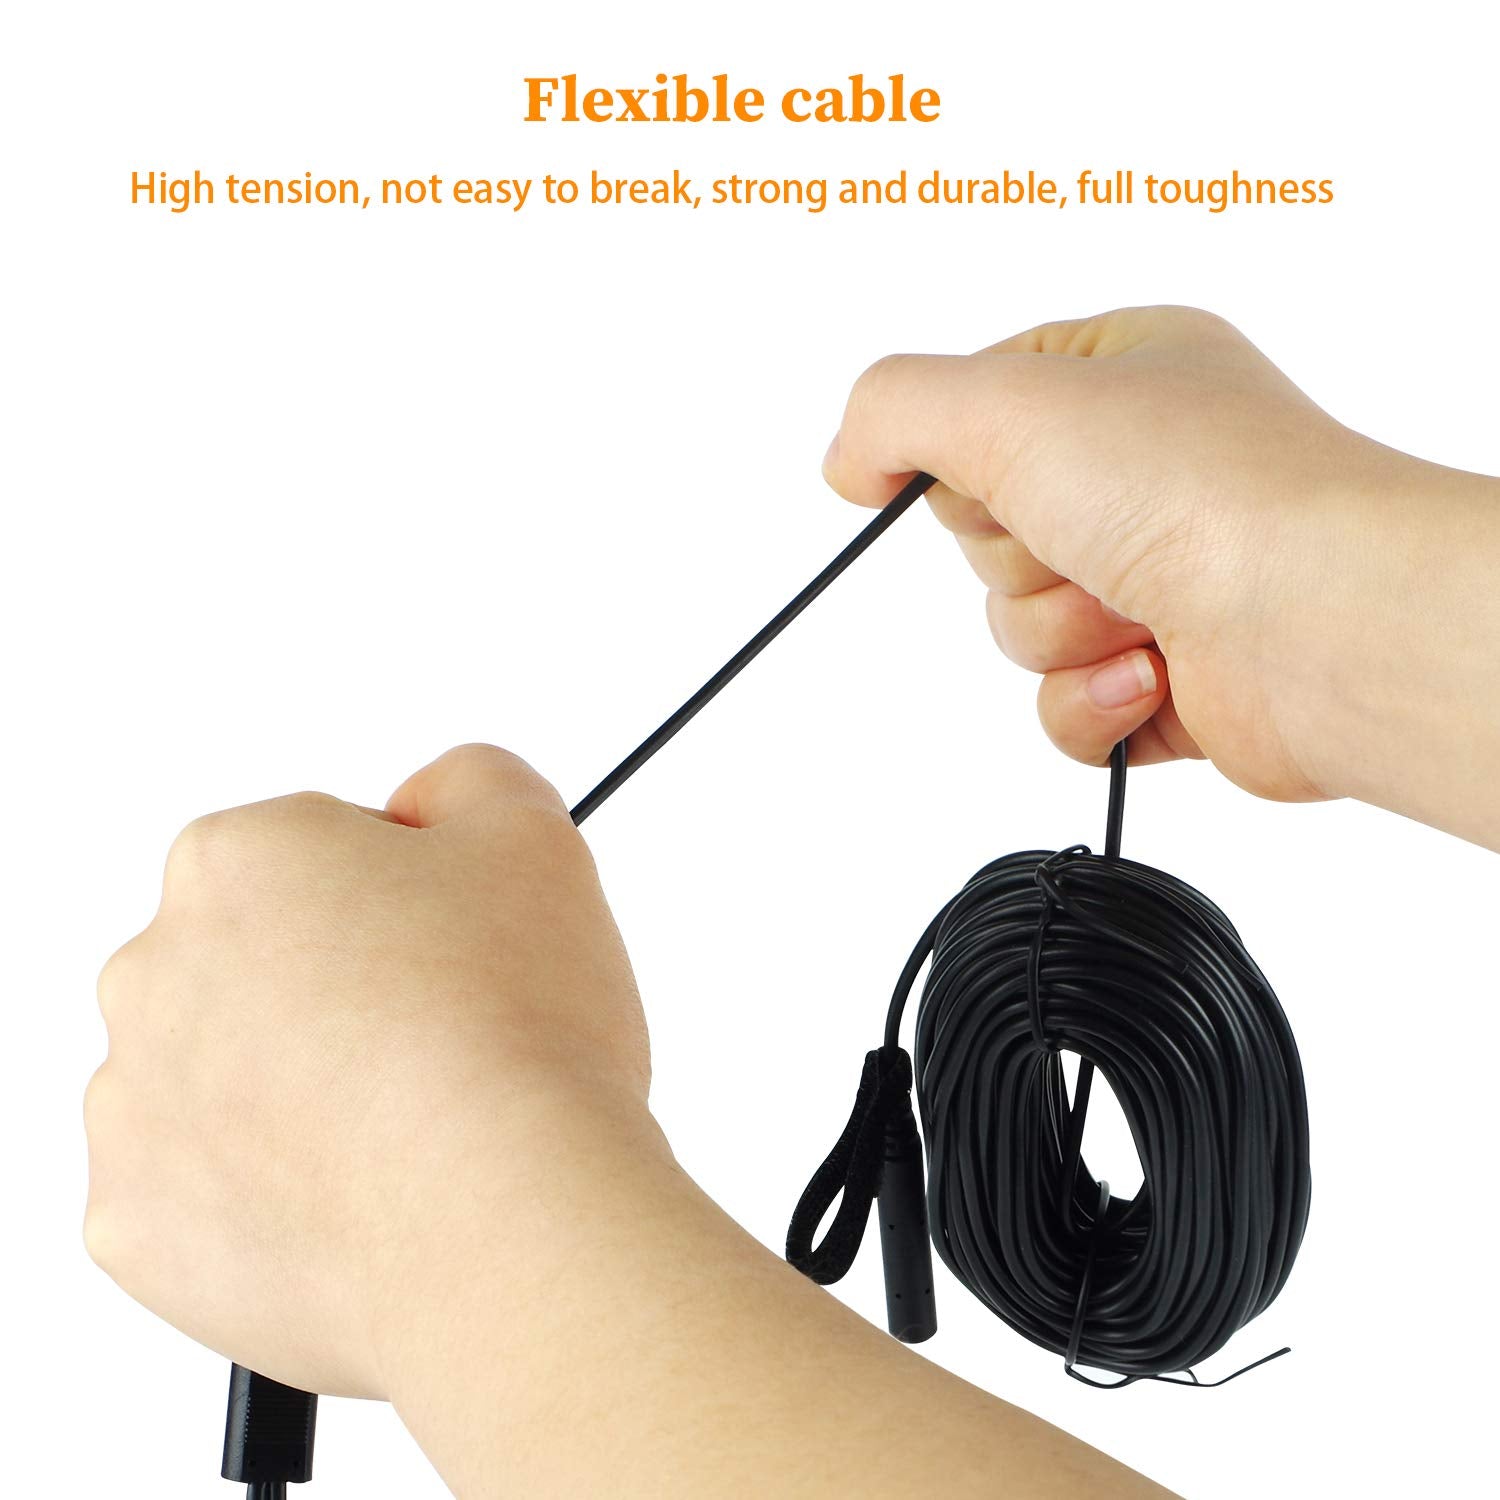 Dericam High Sensitive Microphone for CCTV/IP Camera/DVR/NVR, Audio Pickup Device, 60 Feet Cable, with 1 Female to 2 Male Power Splitter, No Power Supply Included, AP1-2B, Black